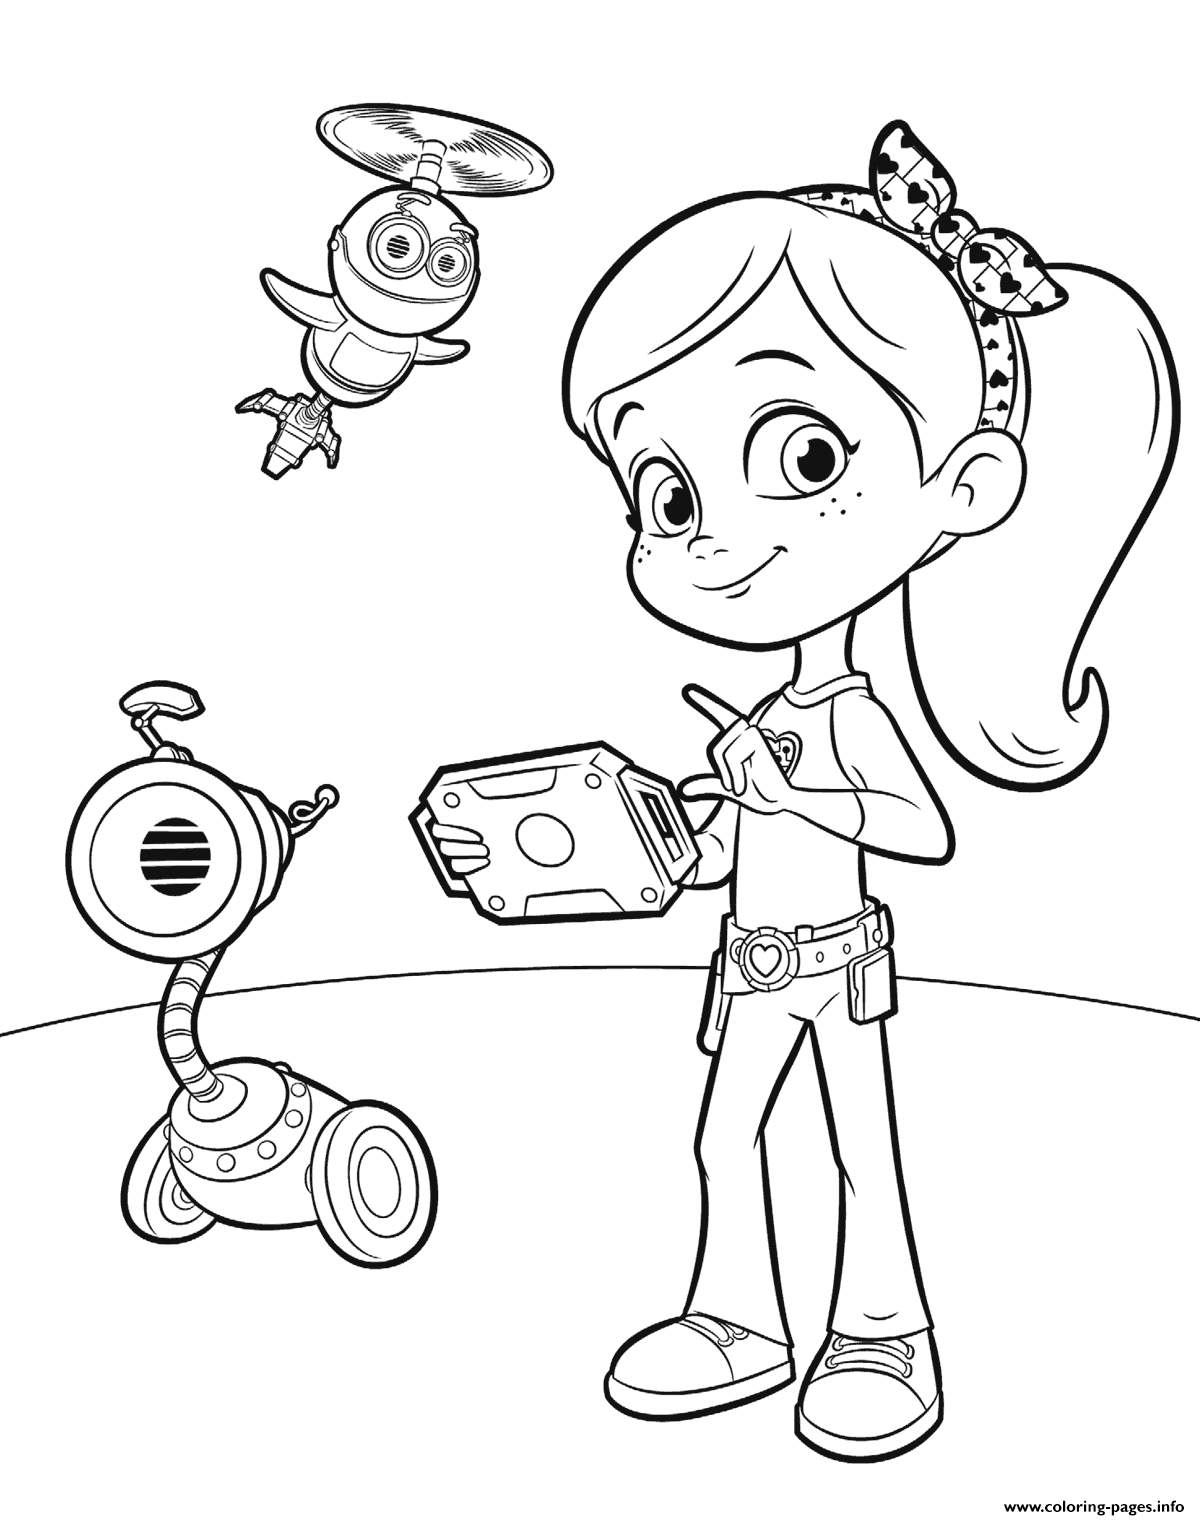 Rusty Rivets For Girls coloring